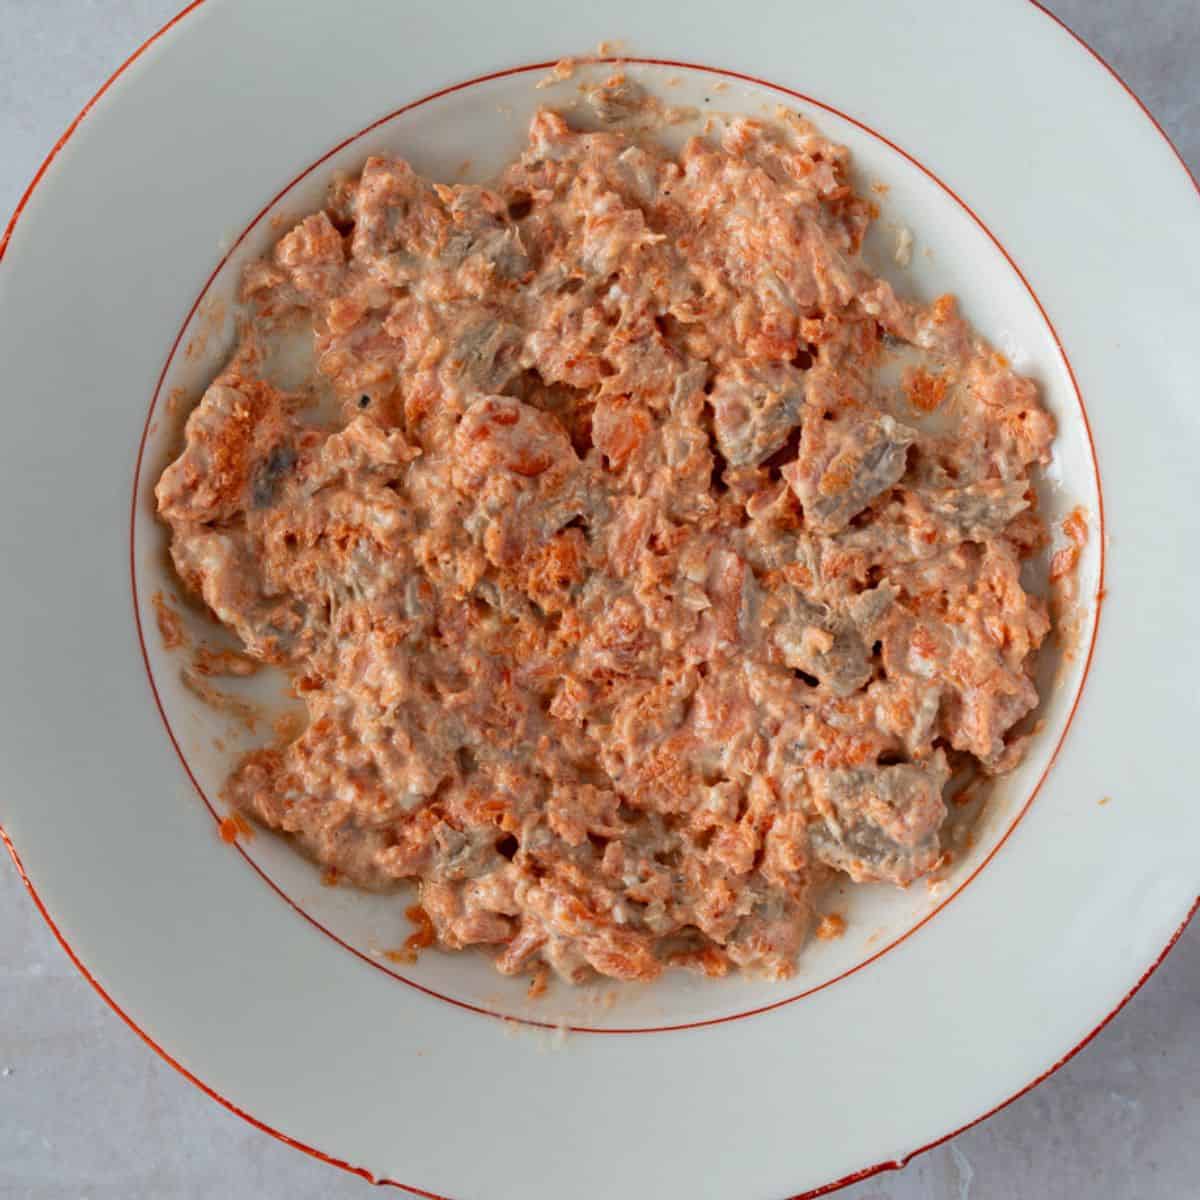 Leftover salmon mixed with mayo and siracha.